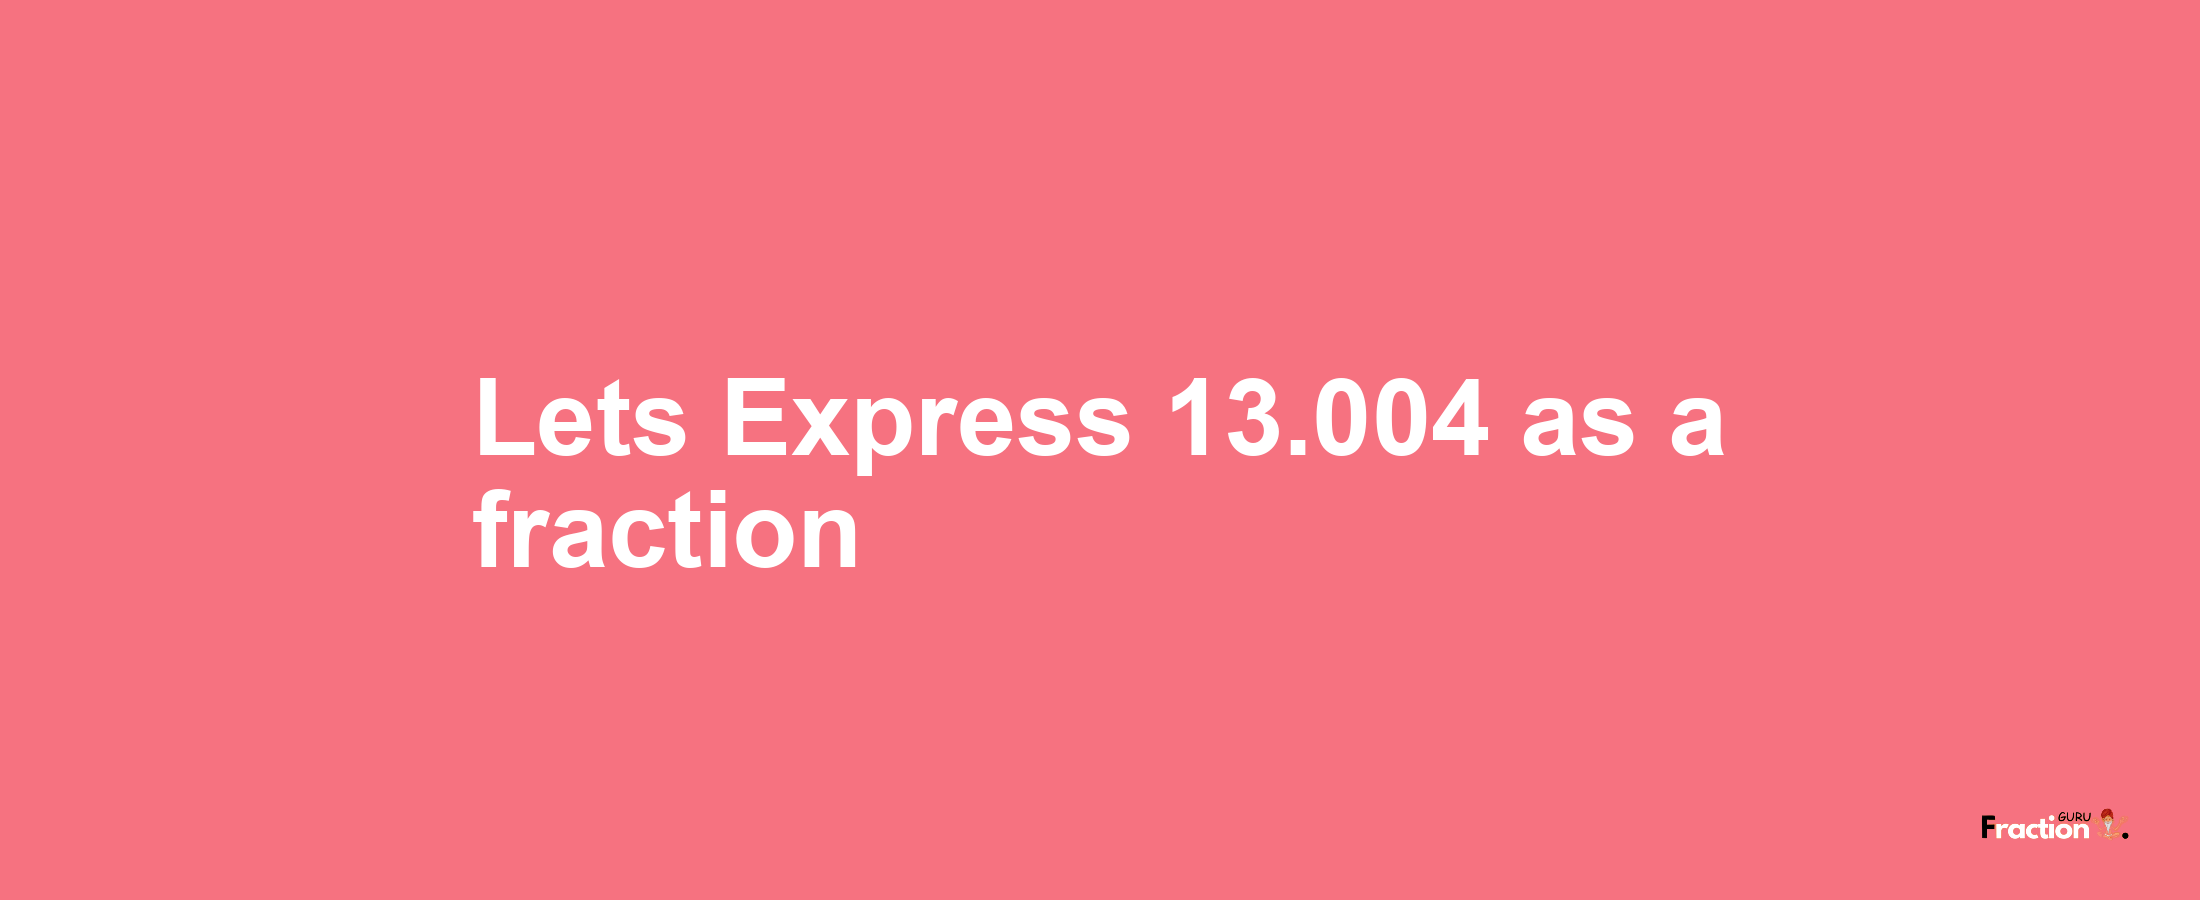 Lets Express 13.004 as afraction